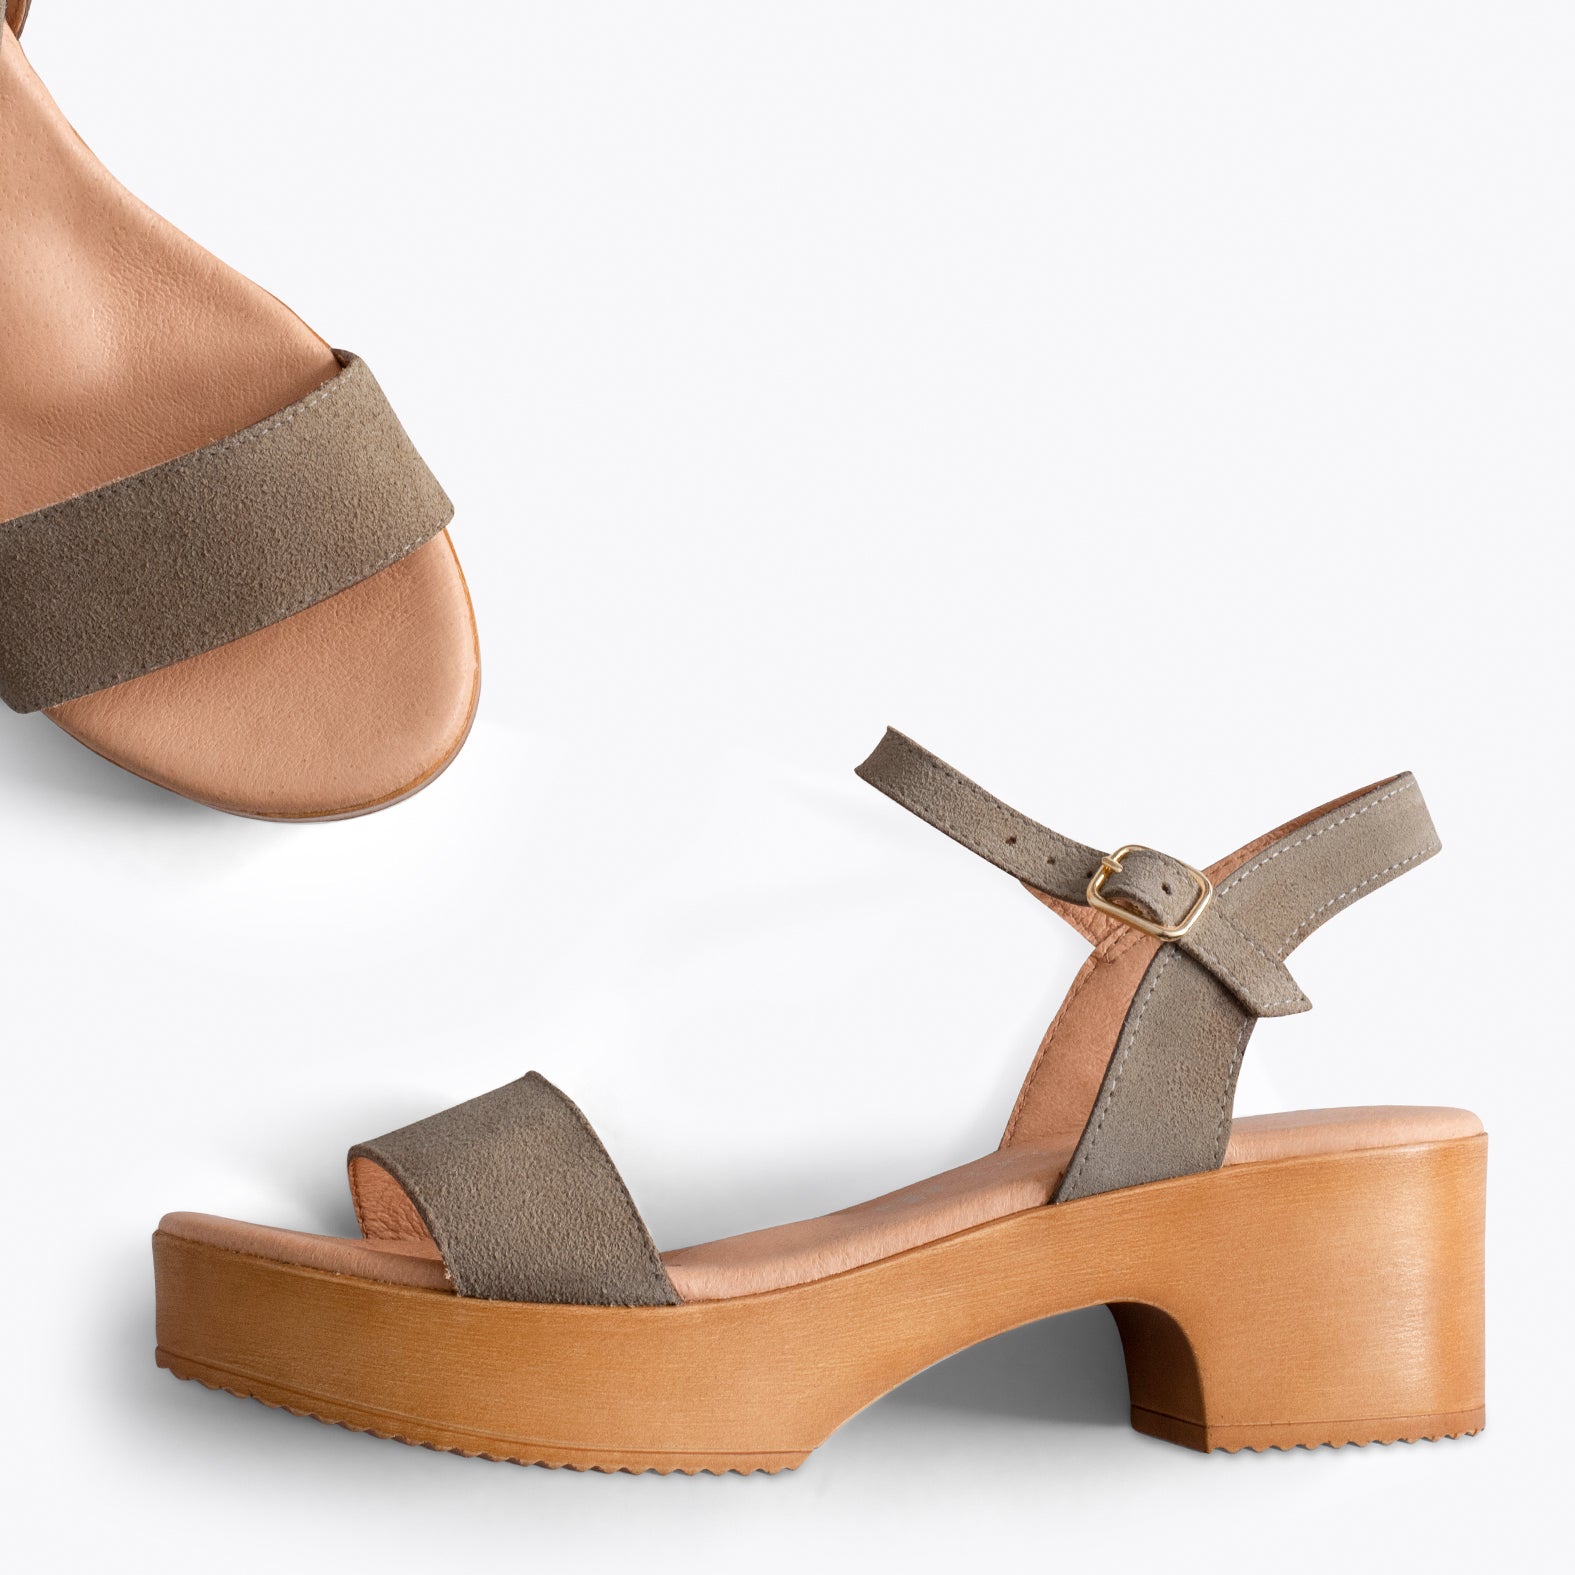 CALA – TAUPE sandals with platform